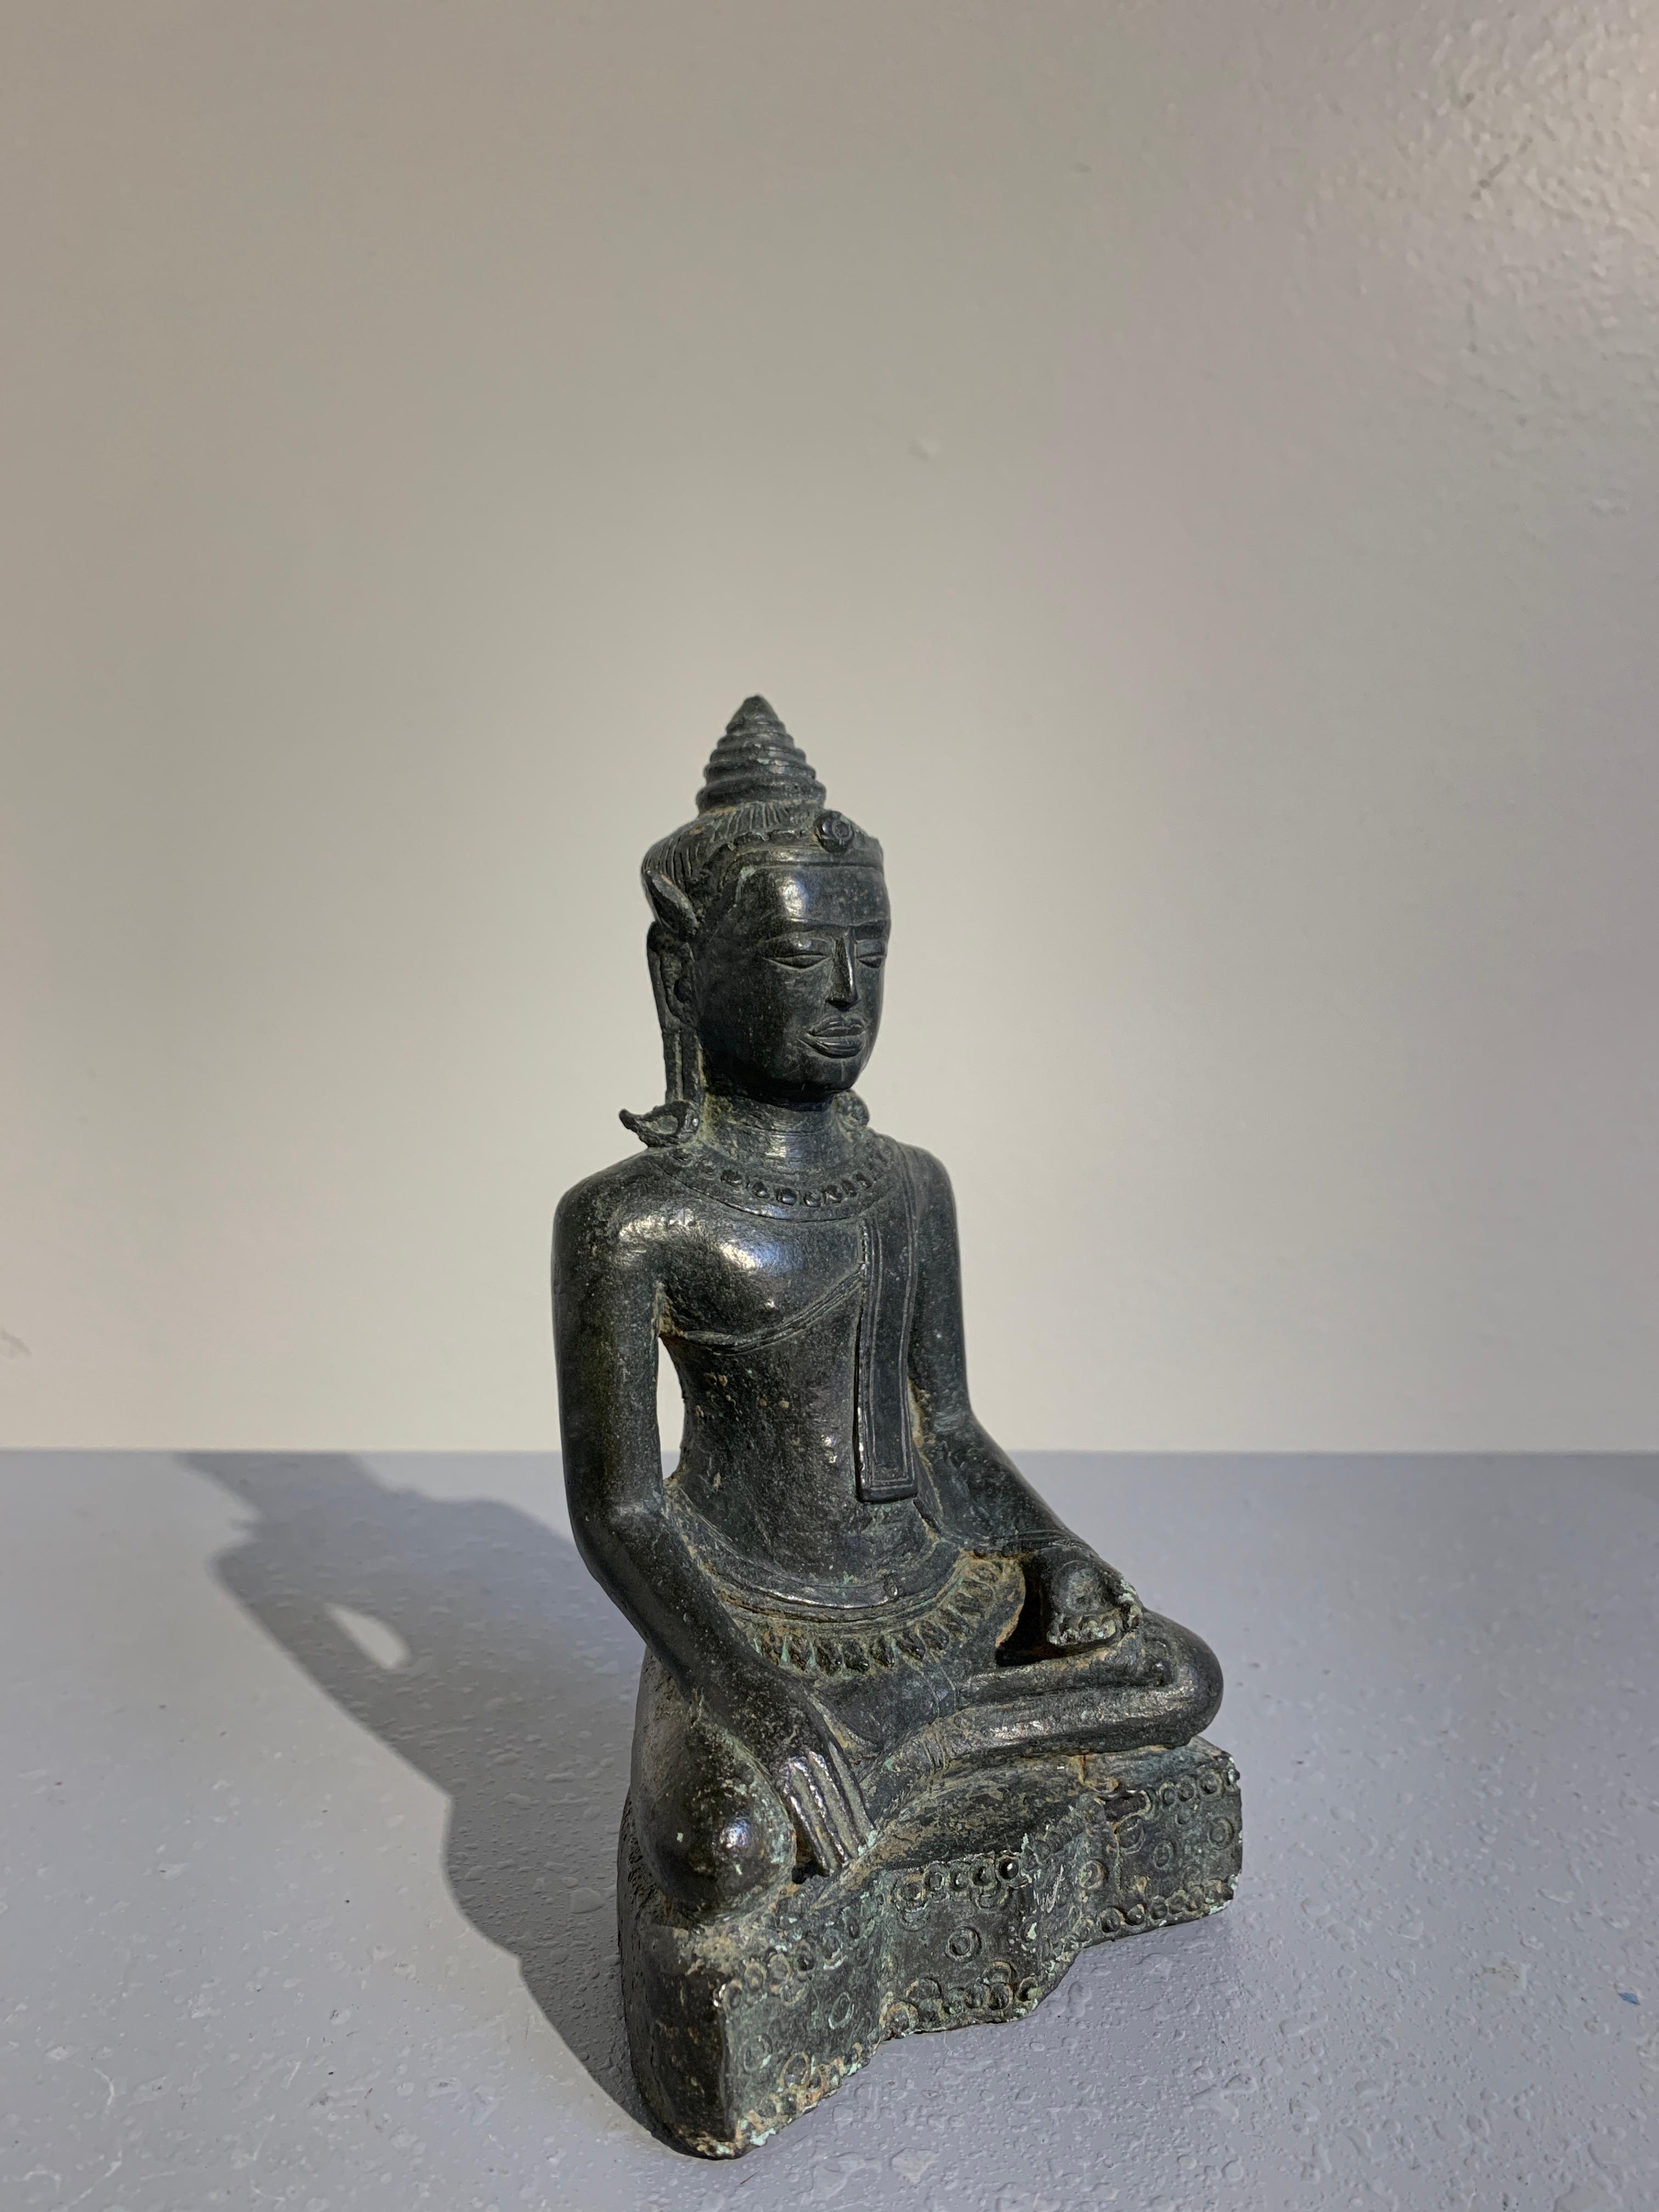 A fine early Thai Lopburi figure of a crowned and adorned Buddha, cast bronze, mid-13th century.

The unusual figure of the Buddha sits in virasana upon a stylized lotus pedestal. He is dressed in the traditional monastic robes, but also adorned